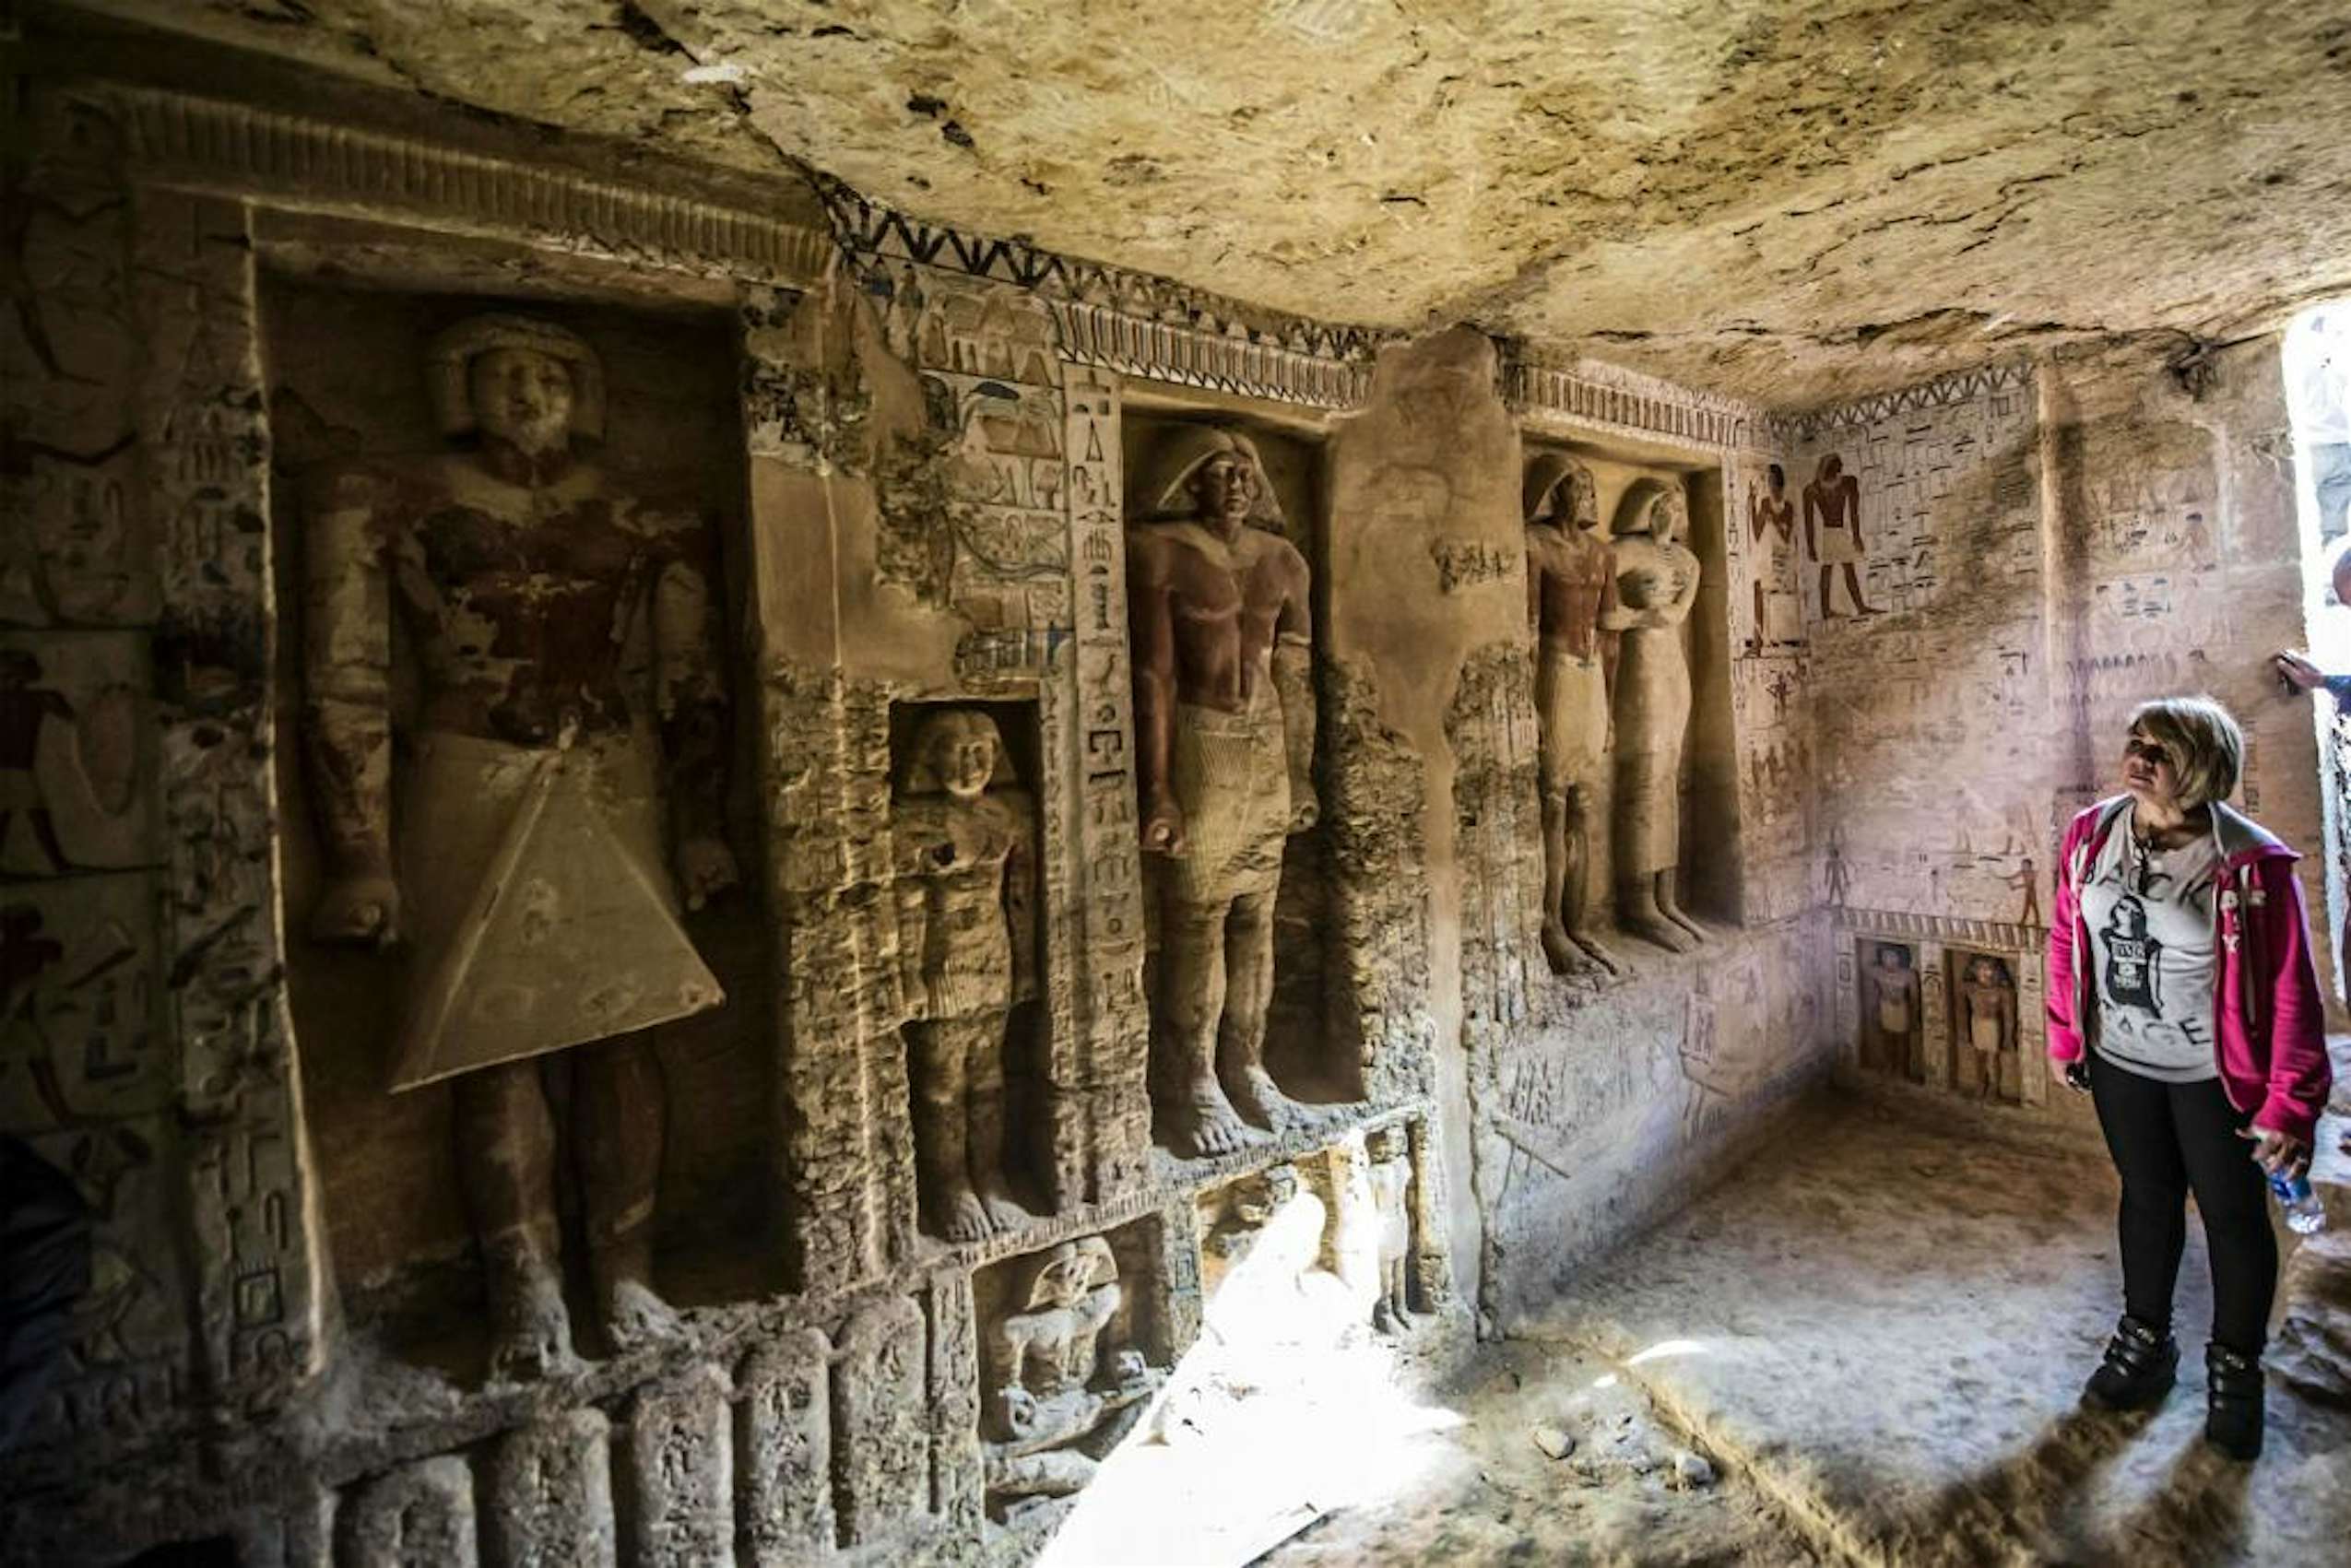  An image of a woman standing in an Ancient Egyptian tomb carved with statues and hieroglyphs in Nekropolis El-Assasif.